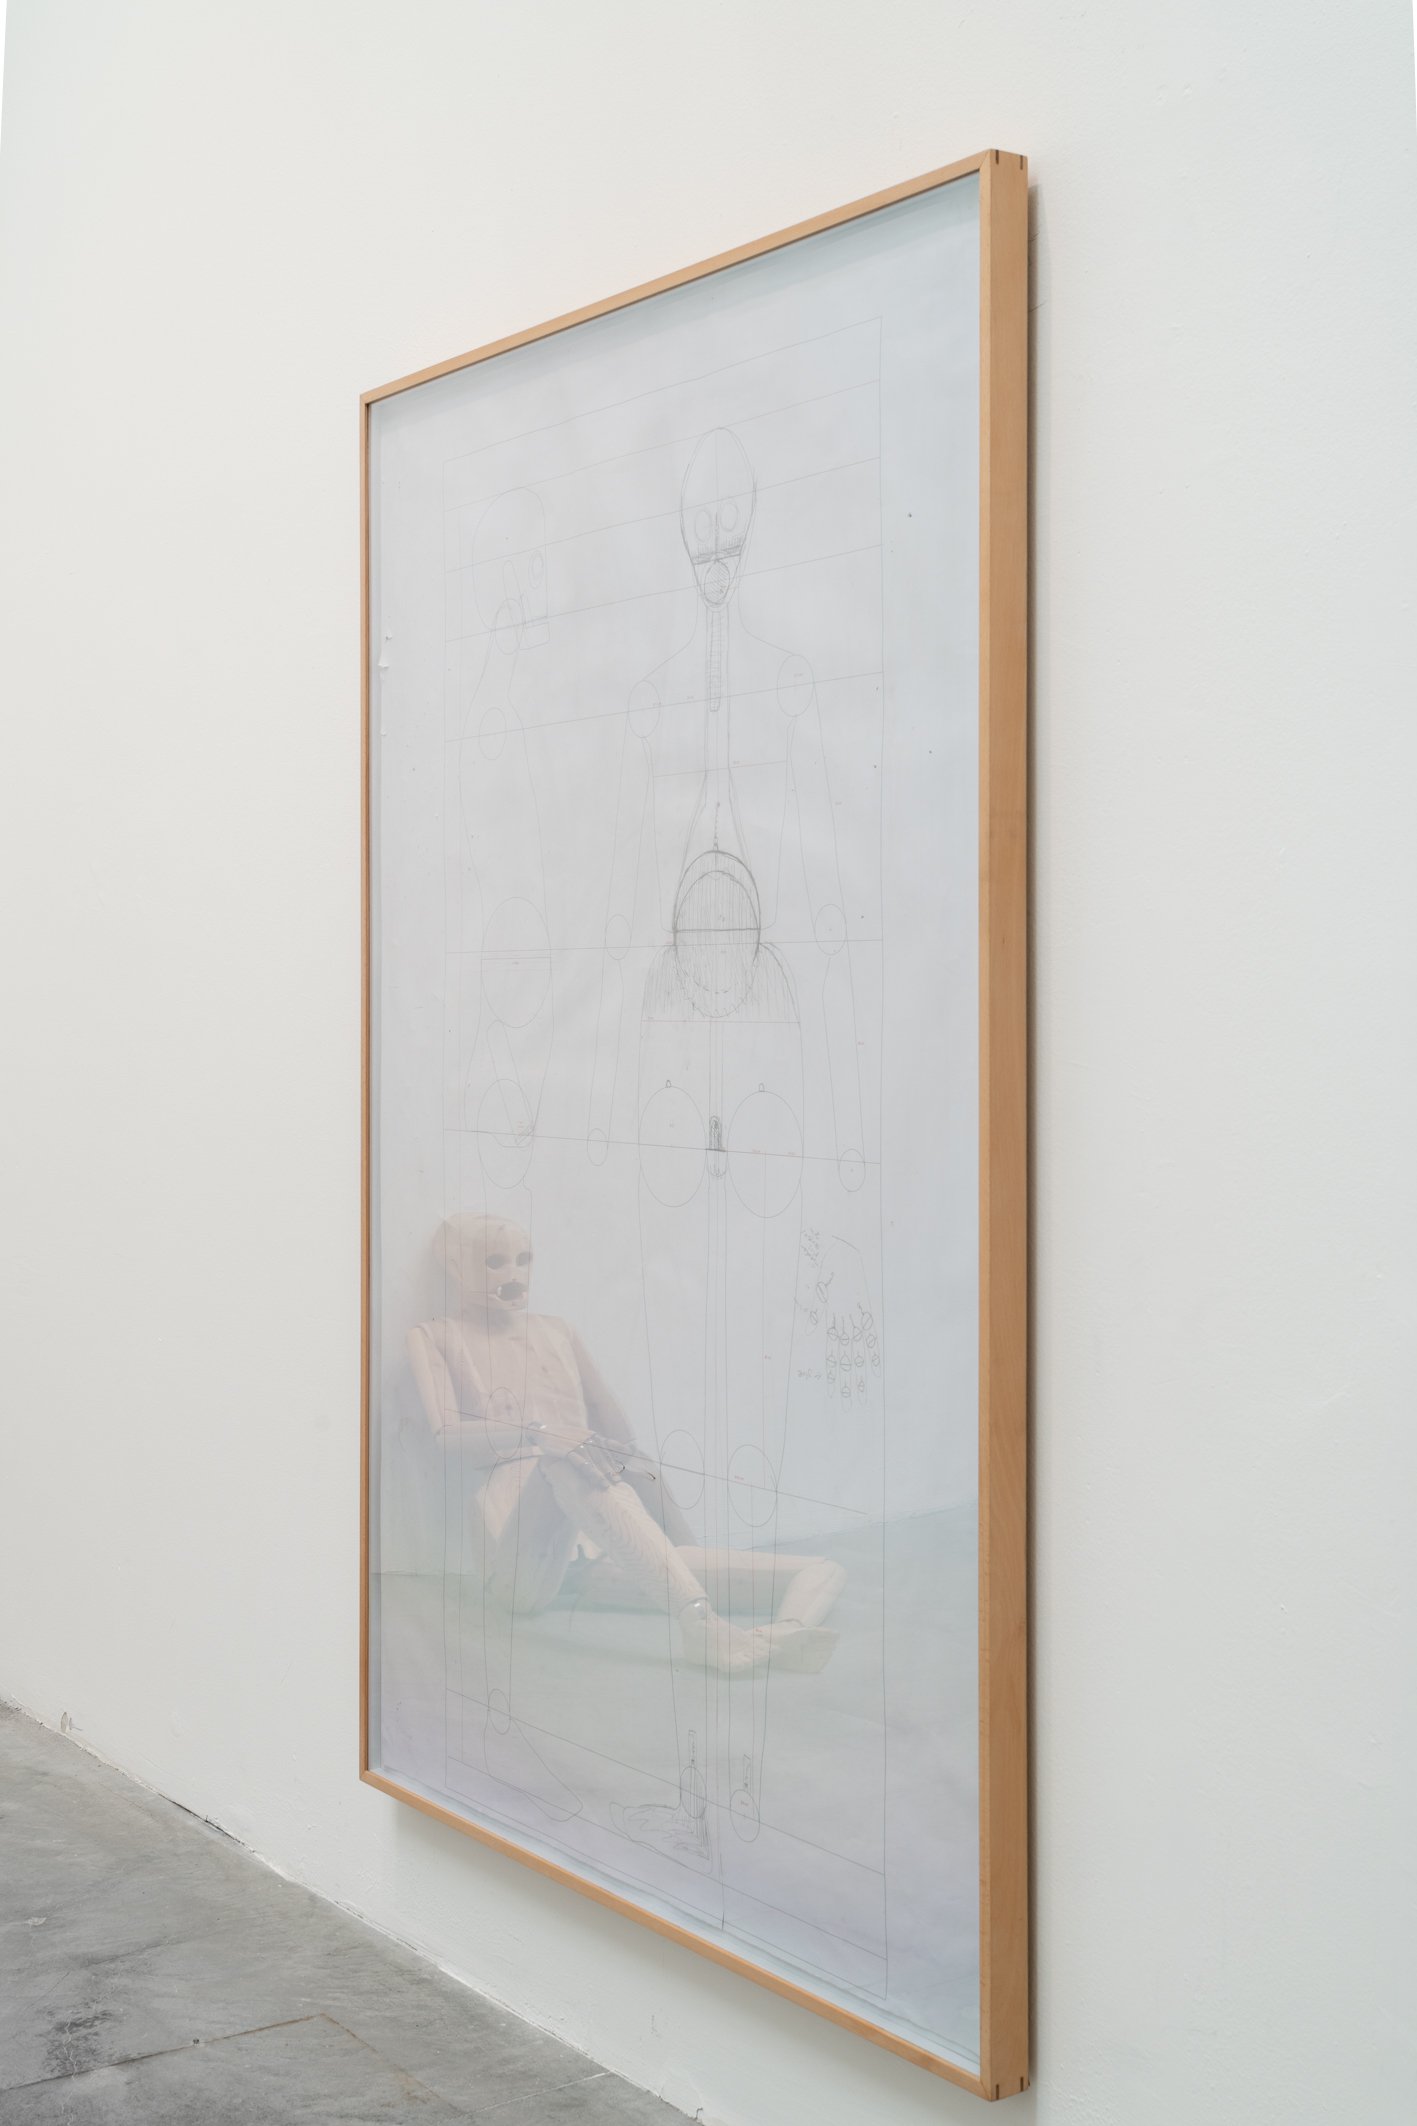 Sidsel Meineche Hansen, Untitled (blueprint for sex robot), technical drawing printed on paper, pen and pencil, custom made beech box frame, acid free / reversible mounting, 207 × 144 cm, 2018. Installation view, The Milk of Dreams, 59th International Art Exhibition – La Biennale di Venezia, Venice, 2022.